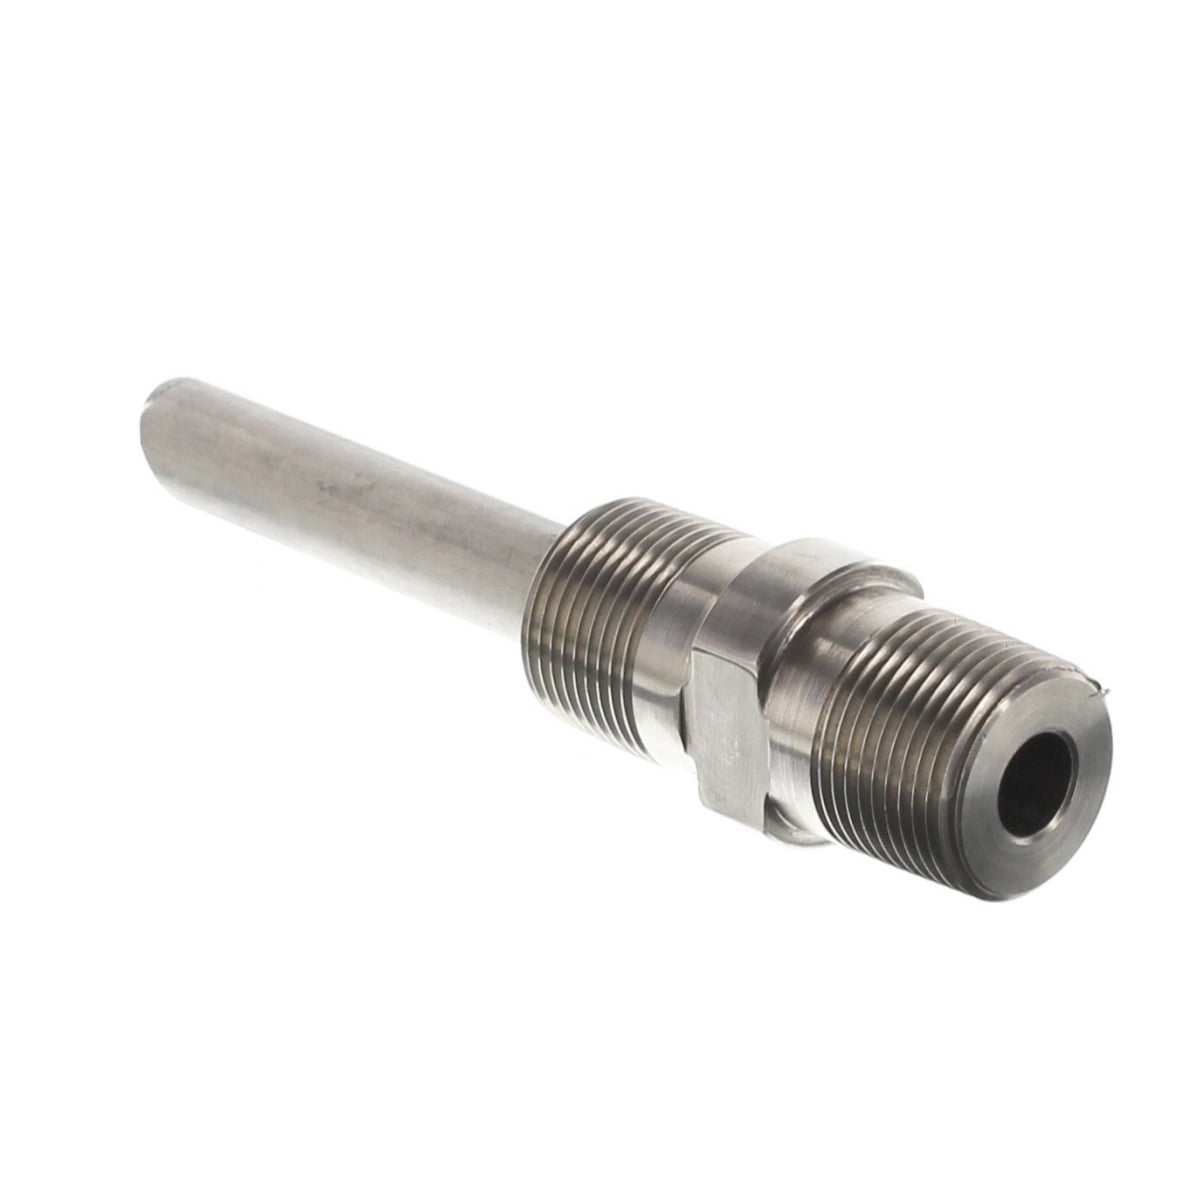 3/4" NPT Stainless Steel Boiler Chemical Injection Quill